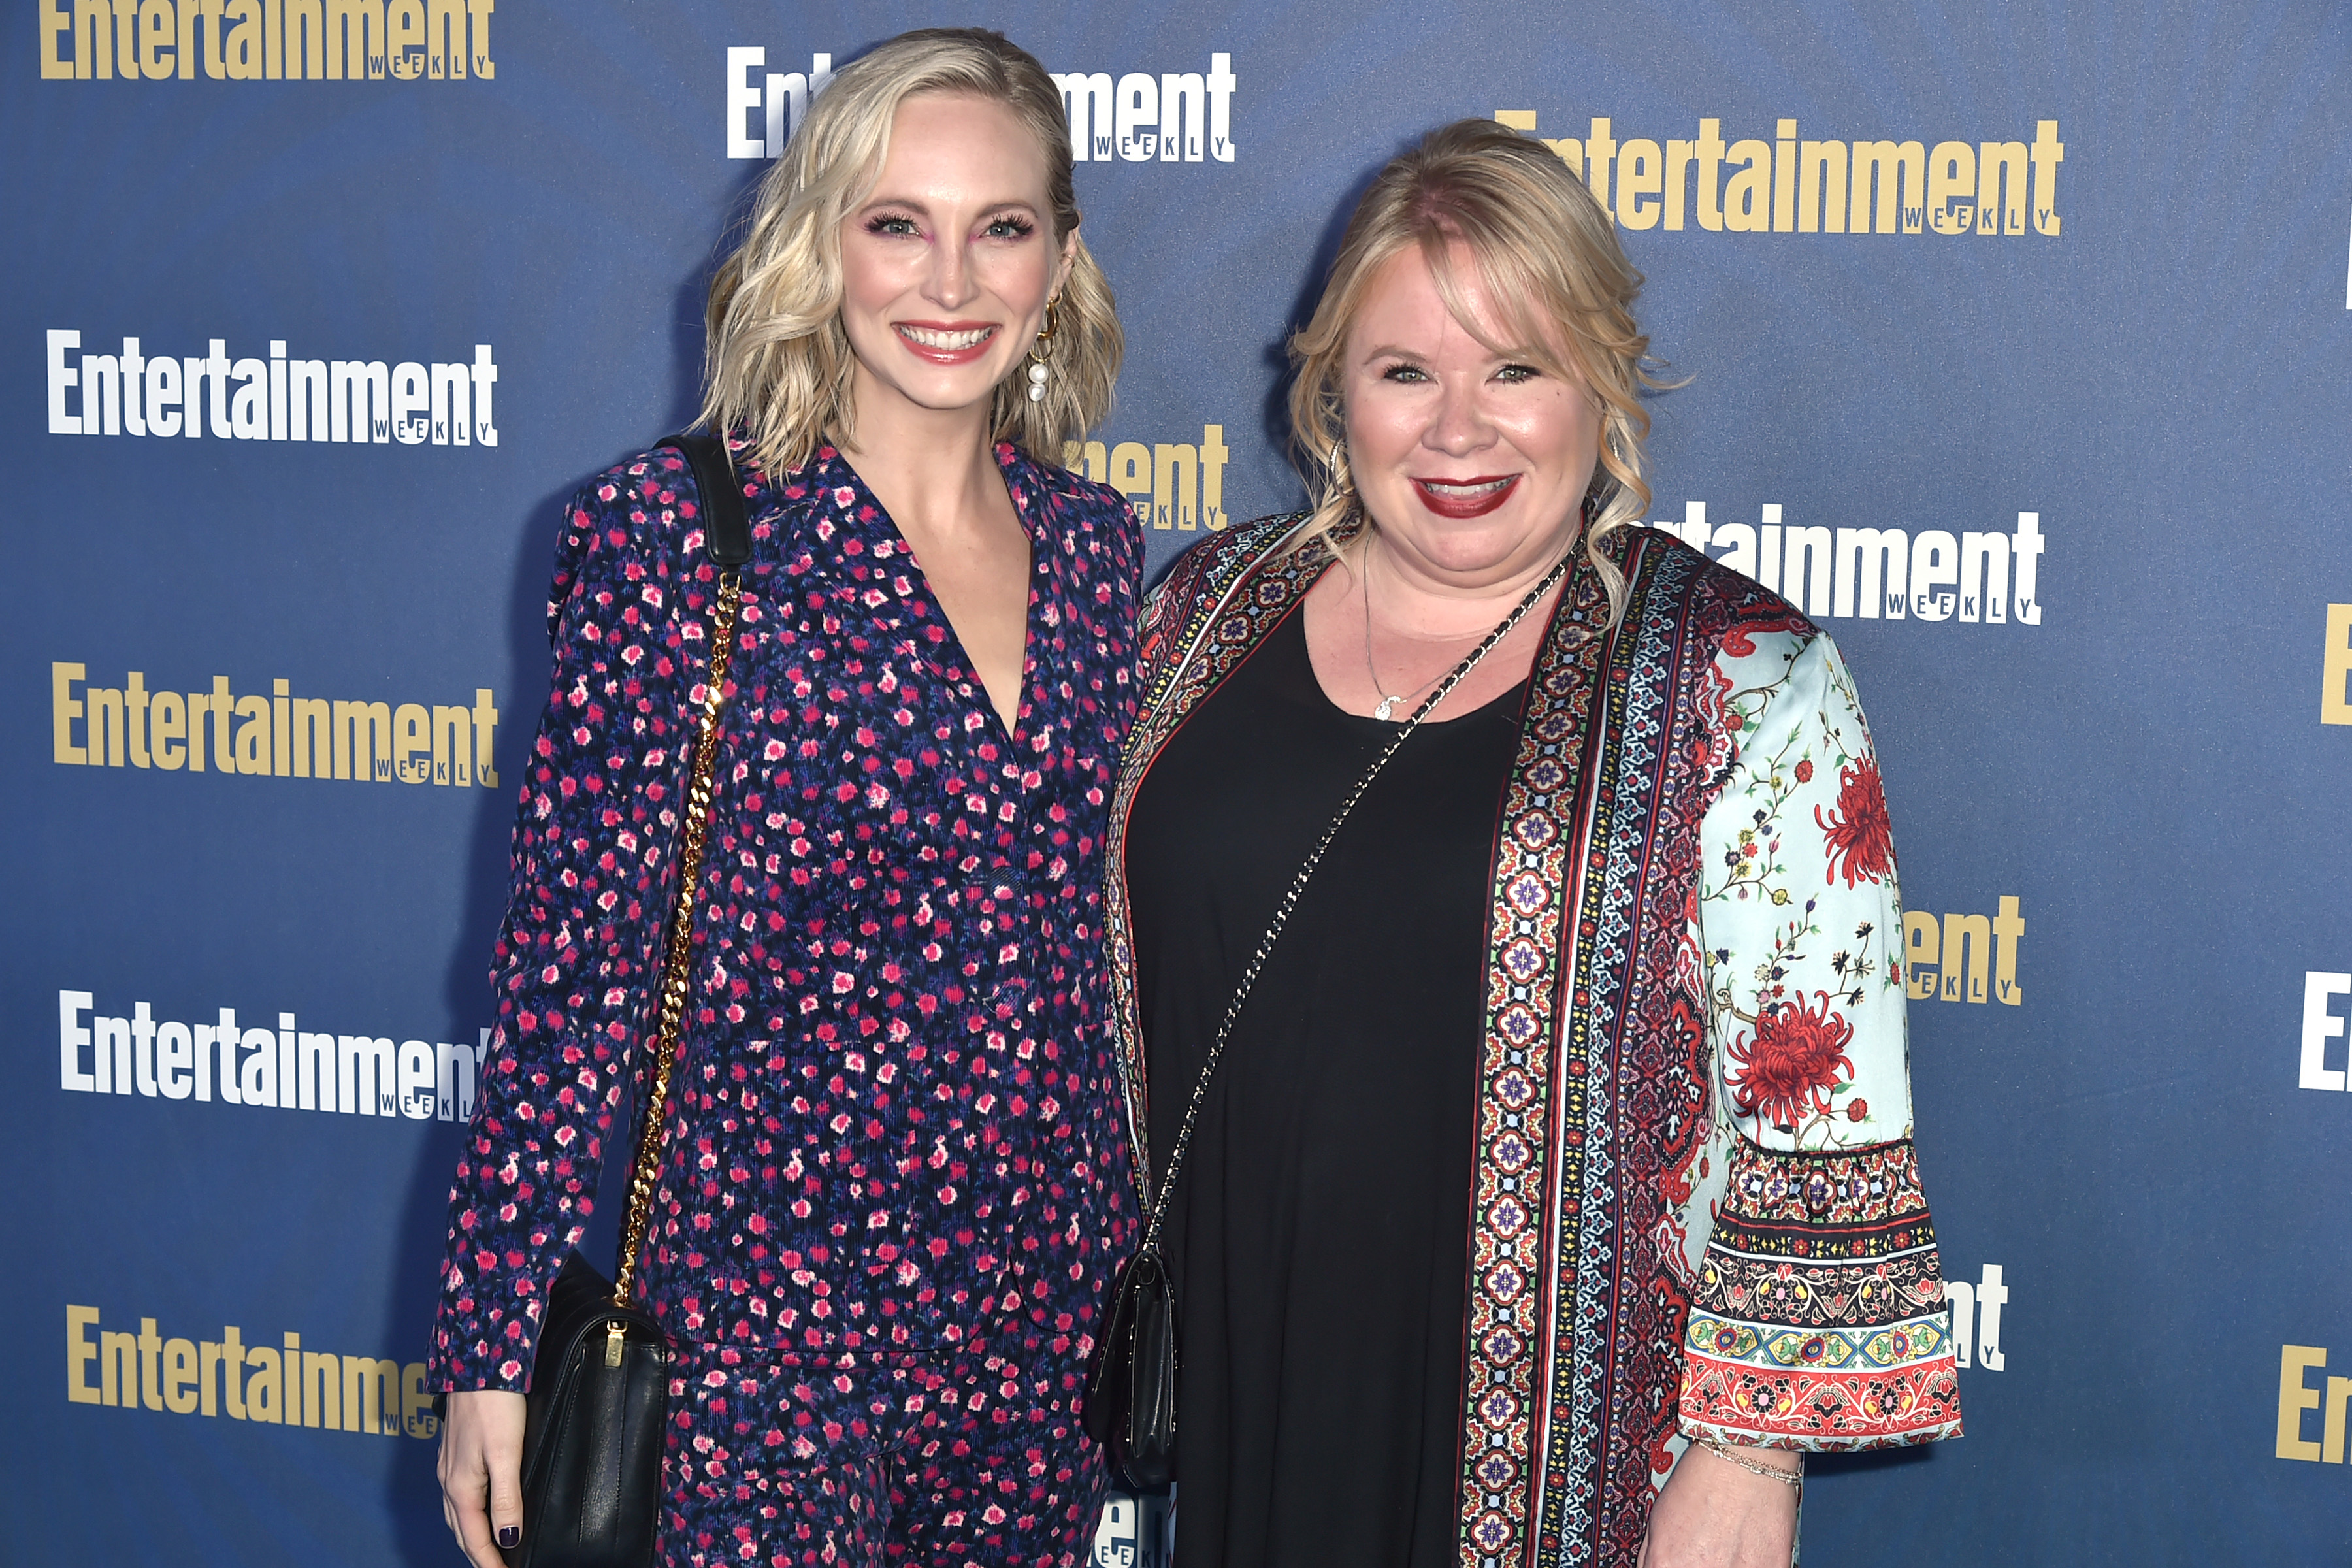 Candice King and Julie Plec, who might have a 'The Vampire Diaries' spinoff in the works, pose for pictures on the red carpet. King wears a dark blue suit with pink flowers. Plec wears a multi-colored floral cardigan over a black shirt.